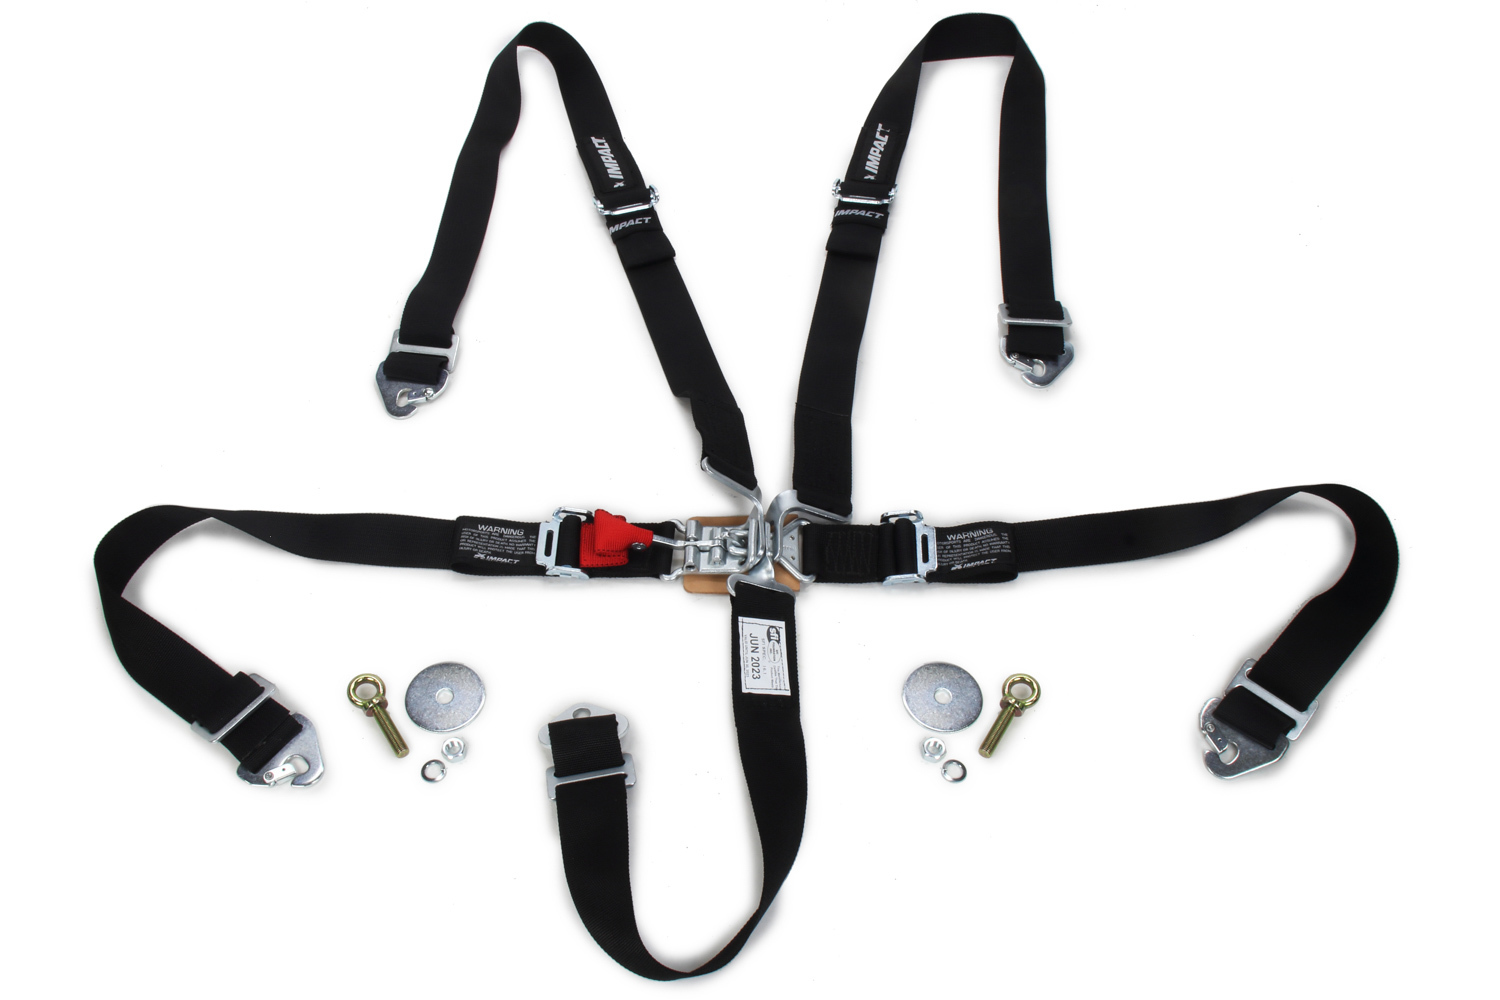 Impact Racing 53119229 Harness, 5 Point, Latch and Link, SFI 16.1, Pull Down Adjust, Snap-on / Wrap Around, 2 in Straps, Individual Harness, Black, Kit